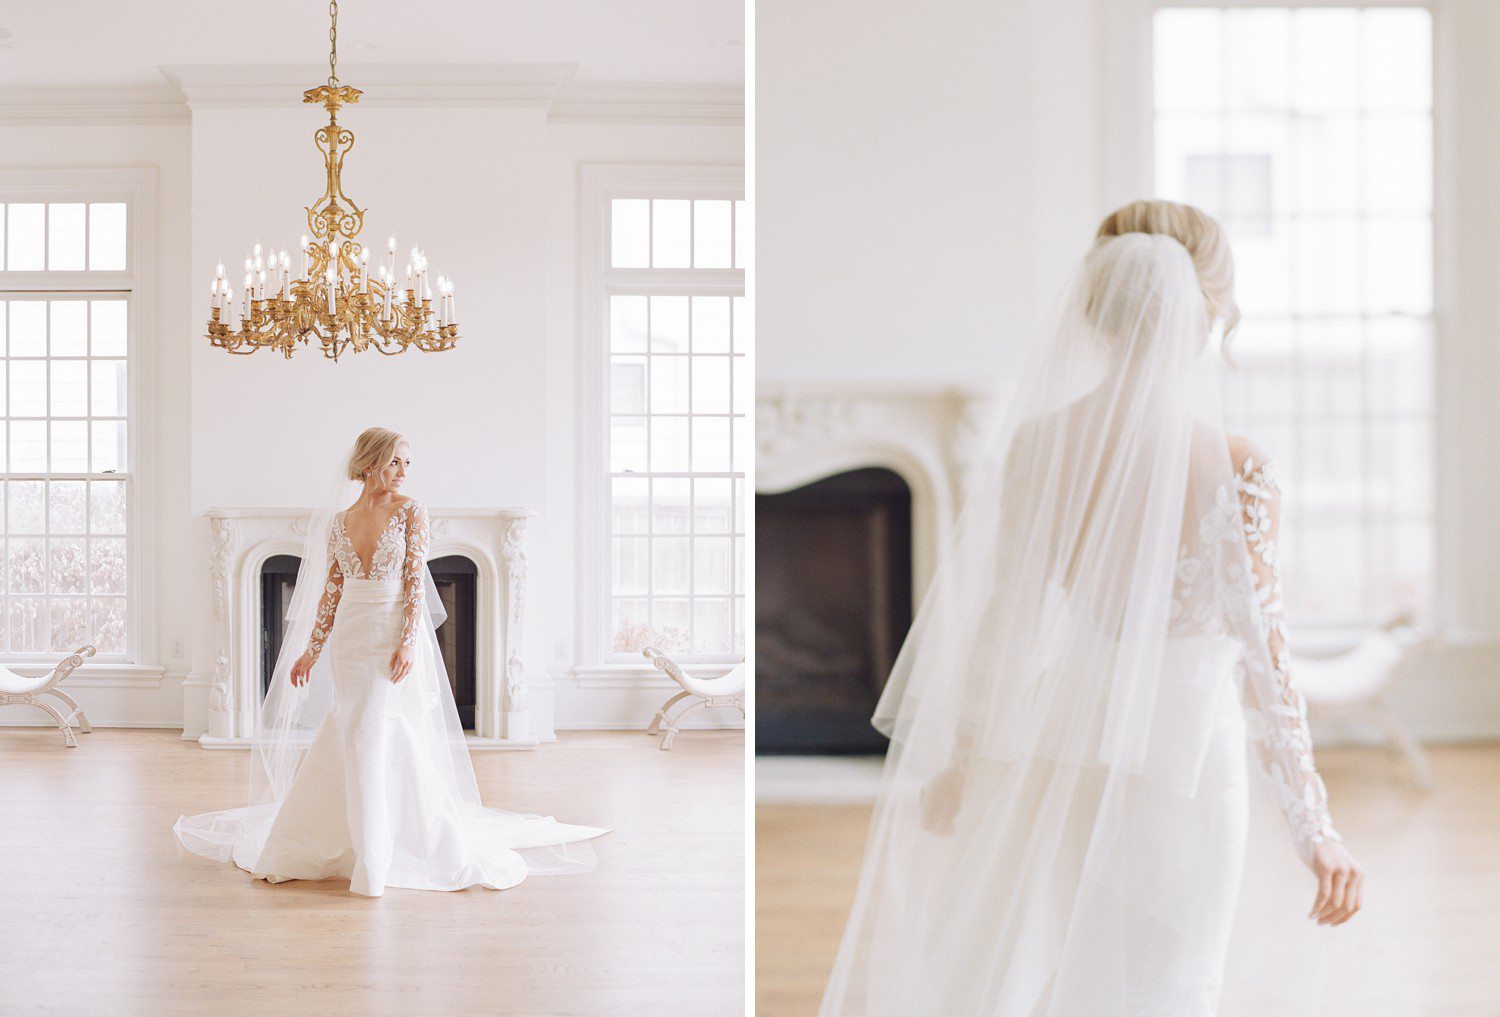 Bridal Session in Houston at The Creative Chateau